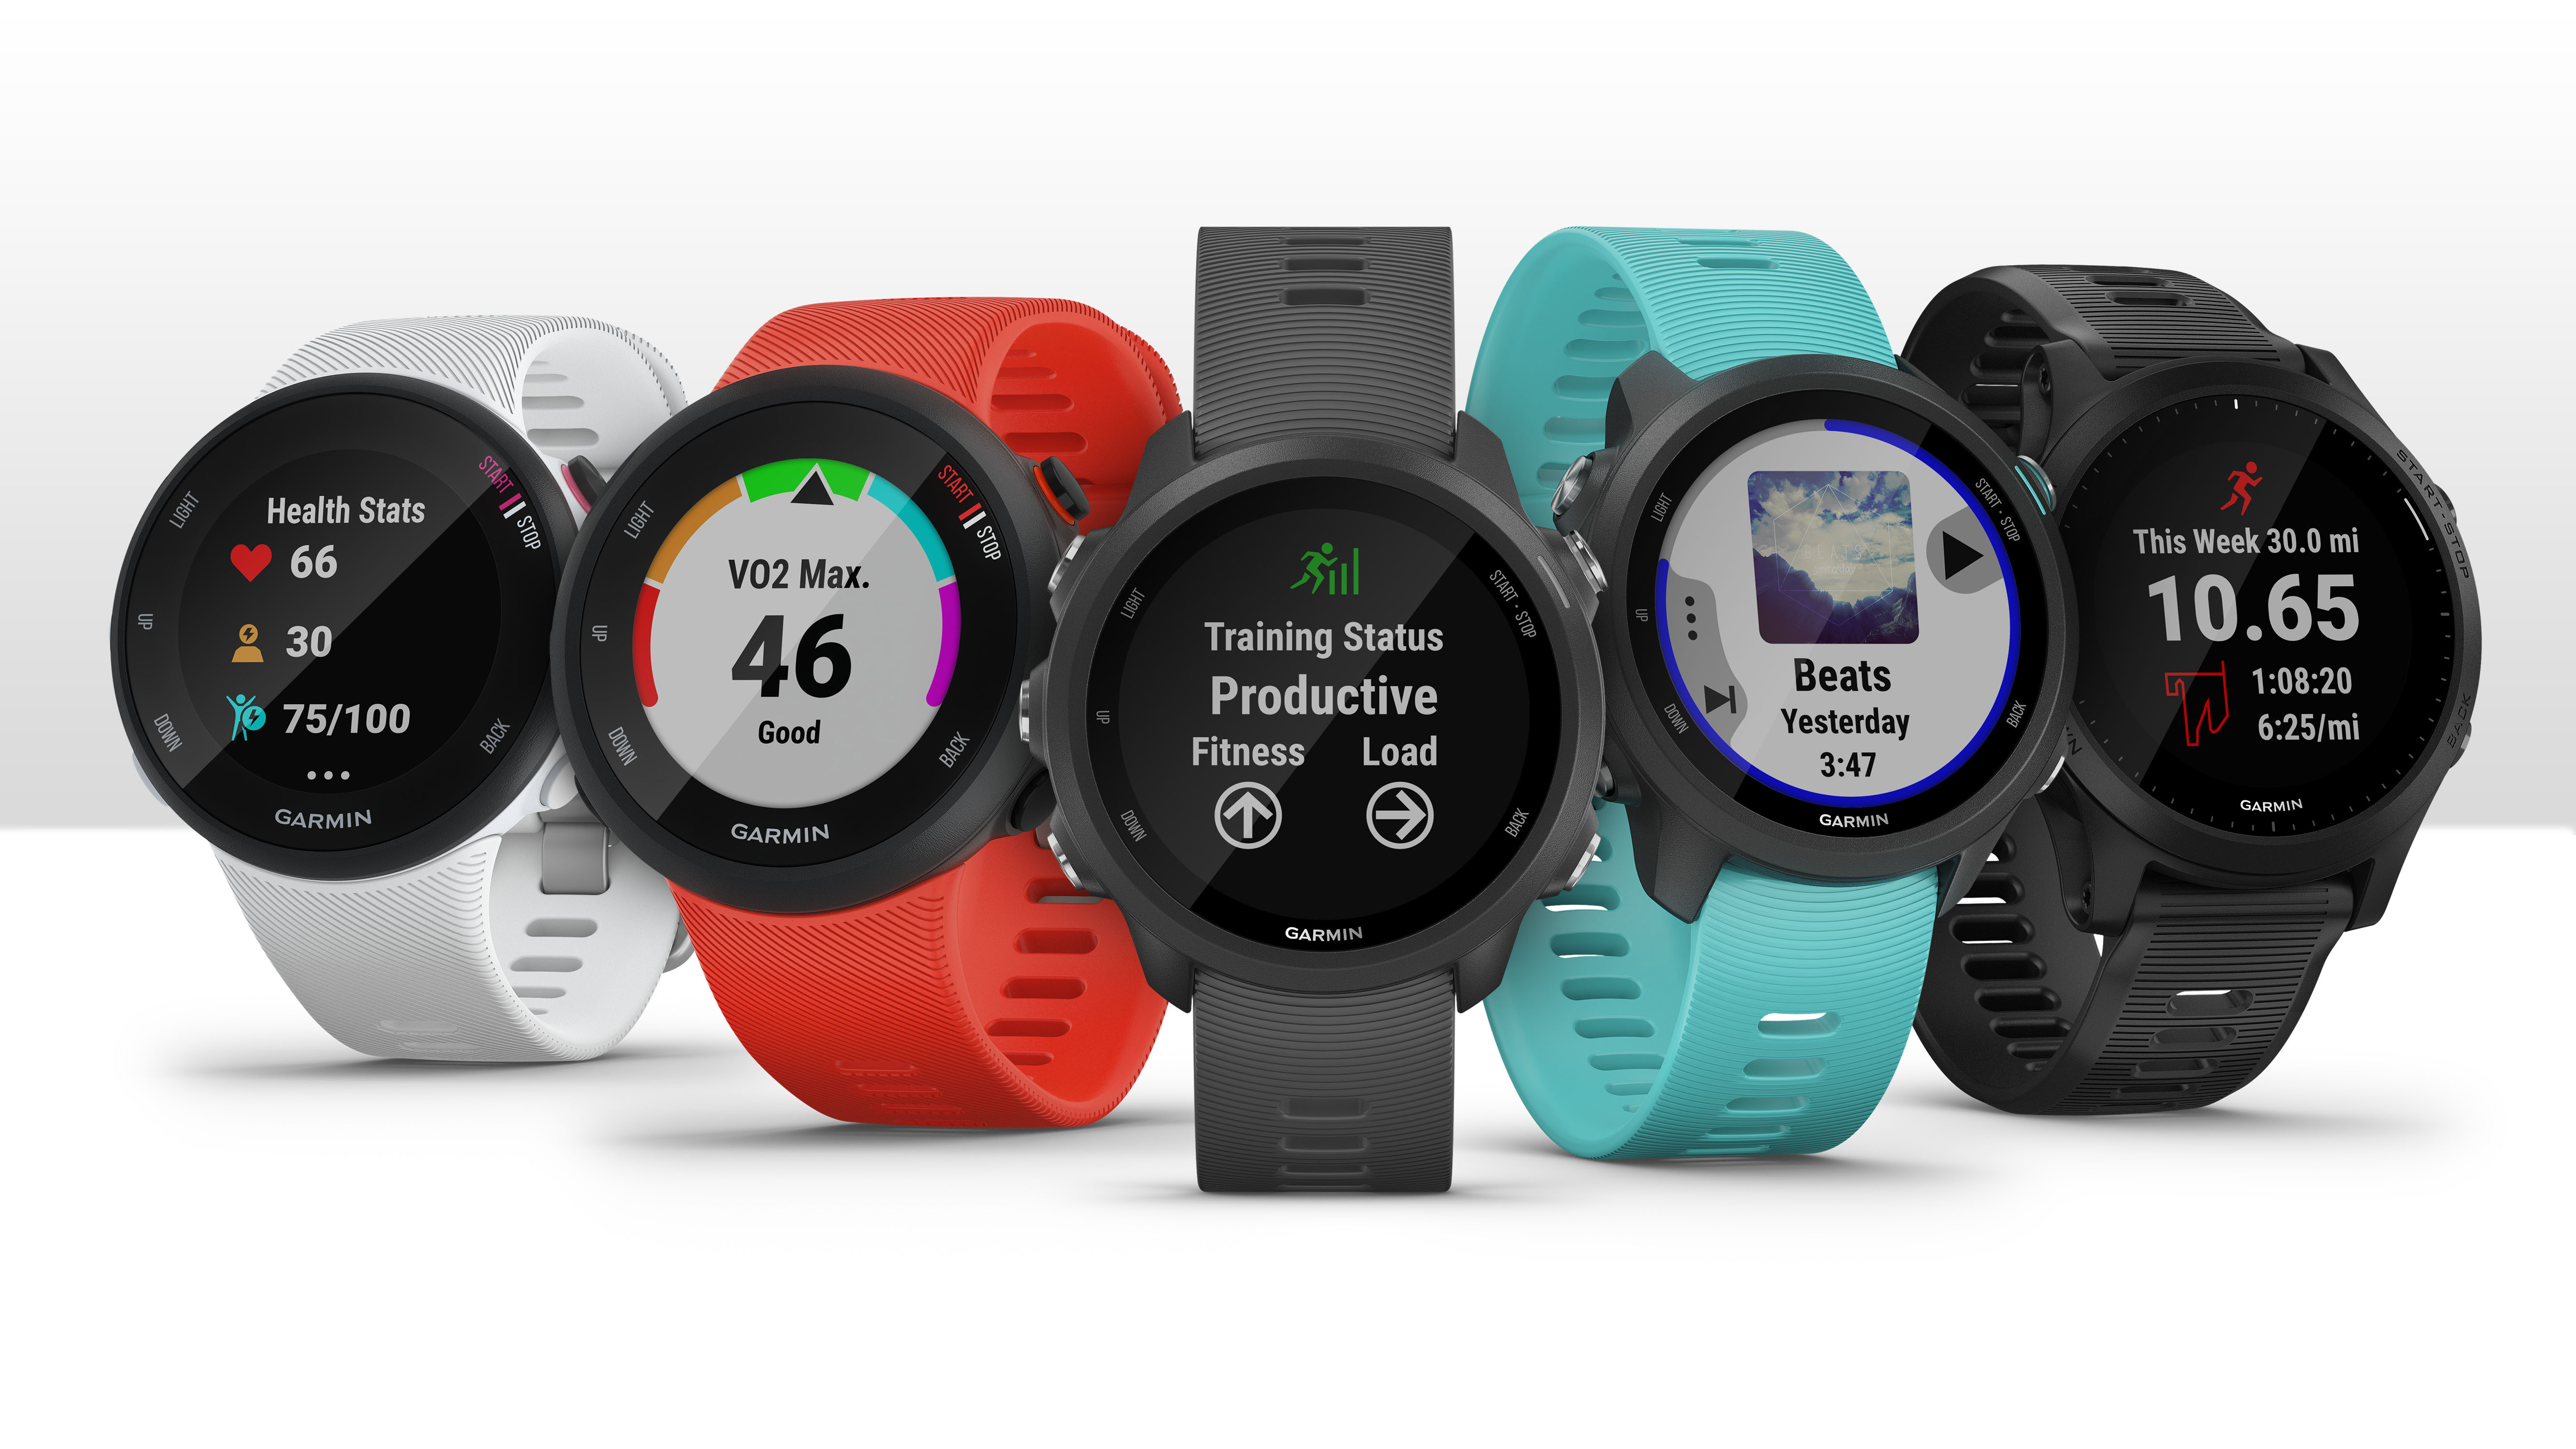 Garmin® announces an all-new Forerunner® series with GPS smartwatches created for all | Business Wire